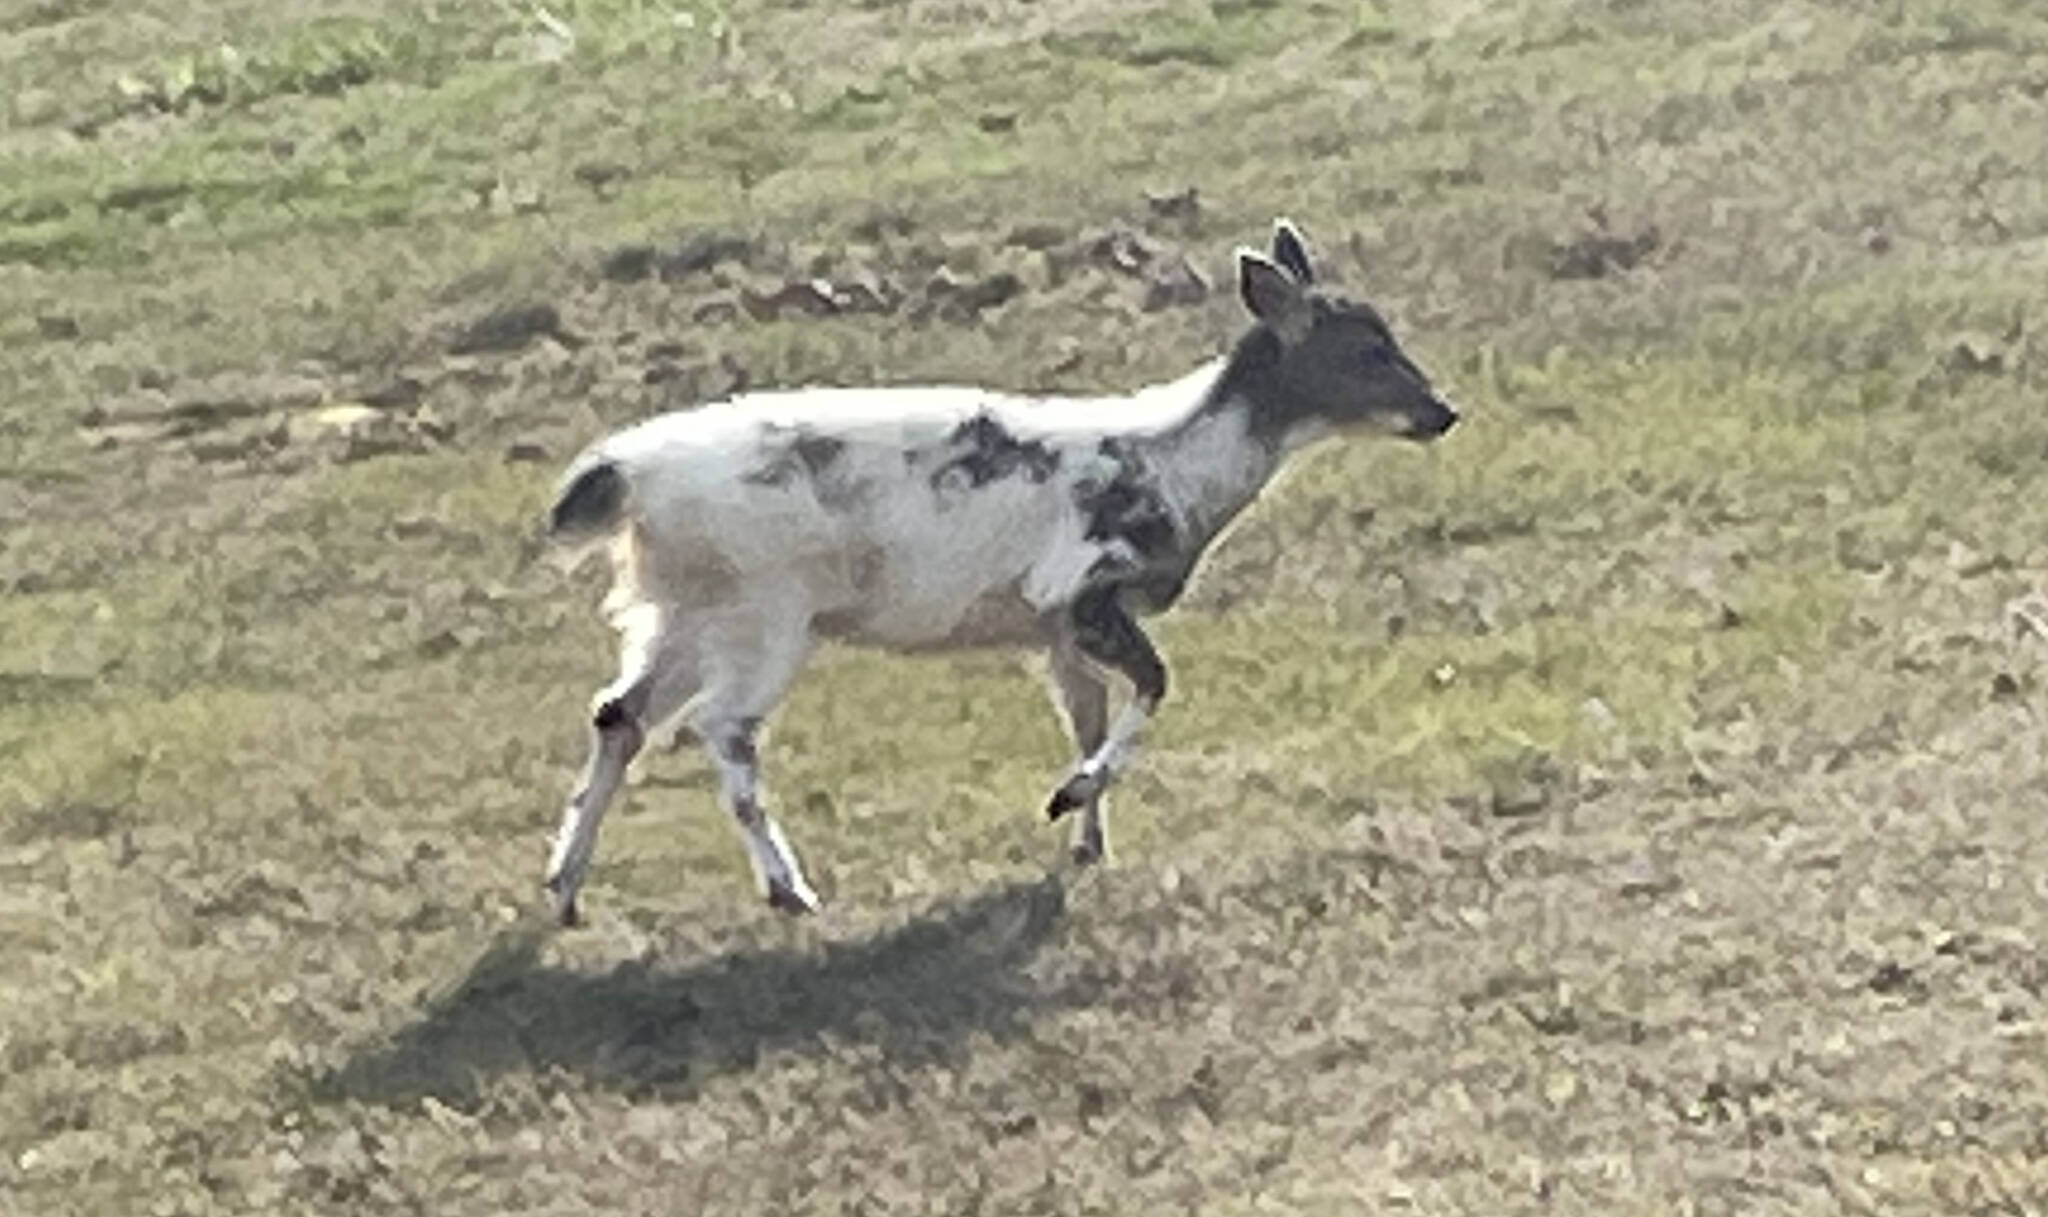 North Whidbey resident Patty Cole took a photo of a piebald fawn.